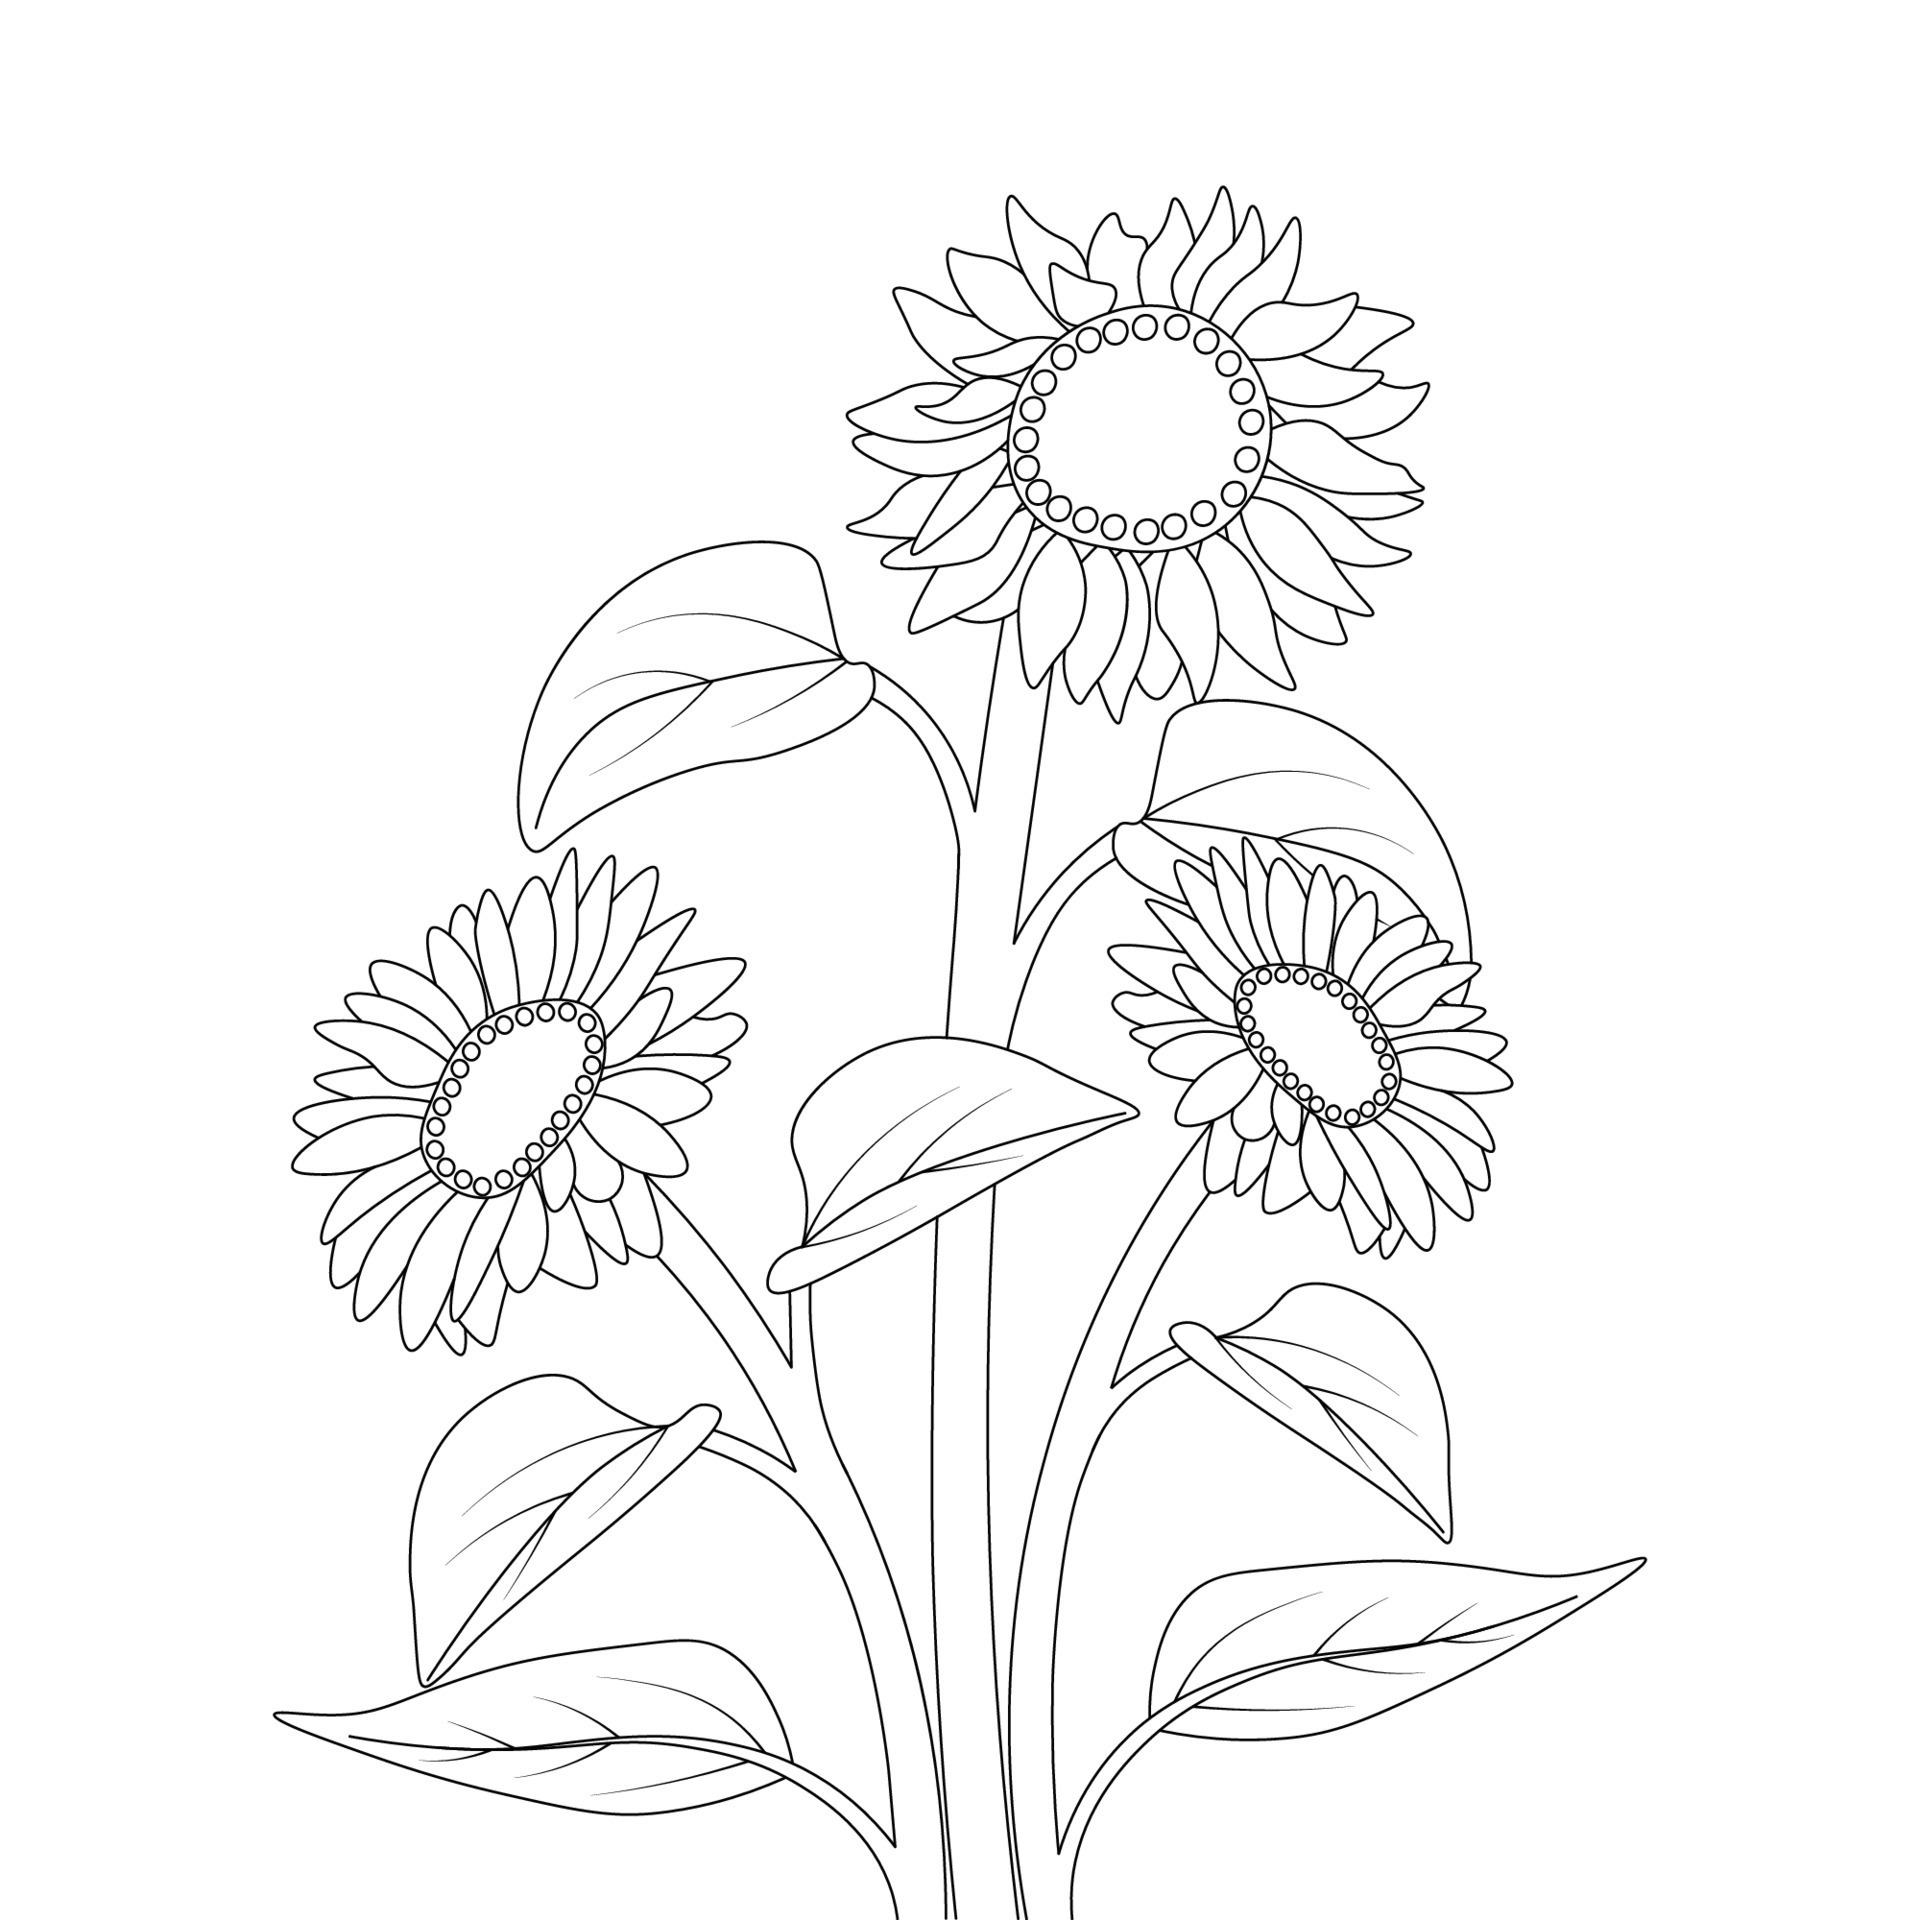 Sunflower Pencil Drawing High-Res Vector Graphic - Getty Images